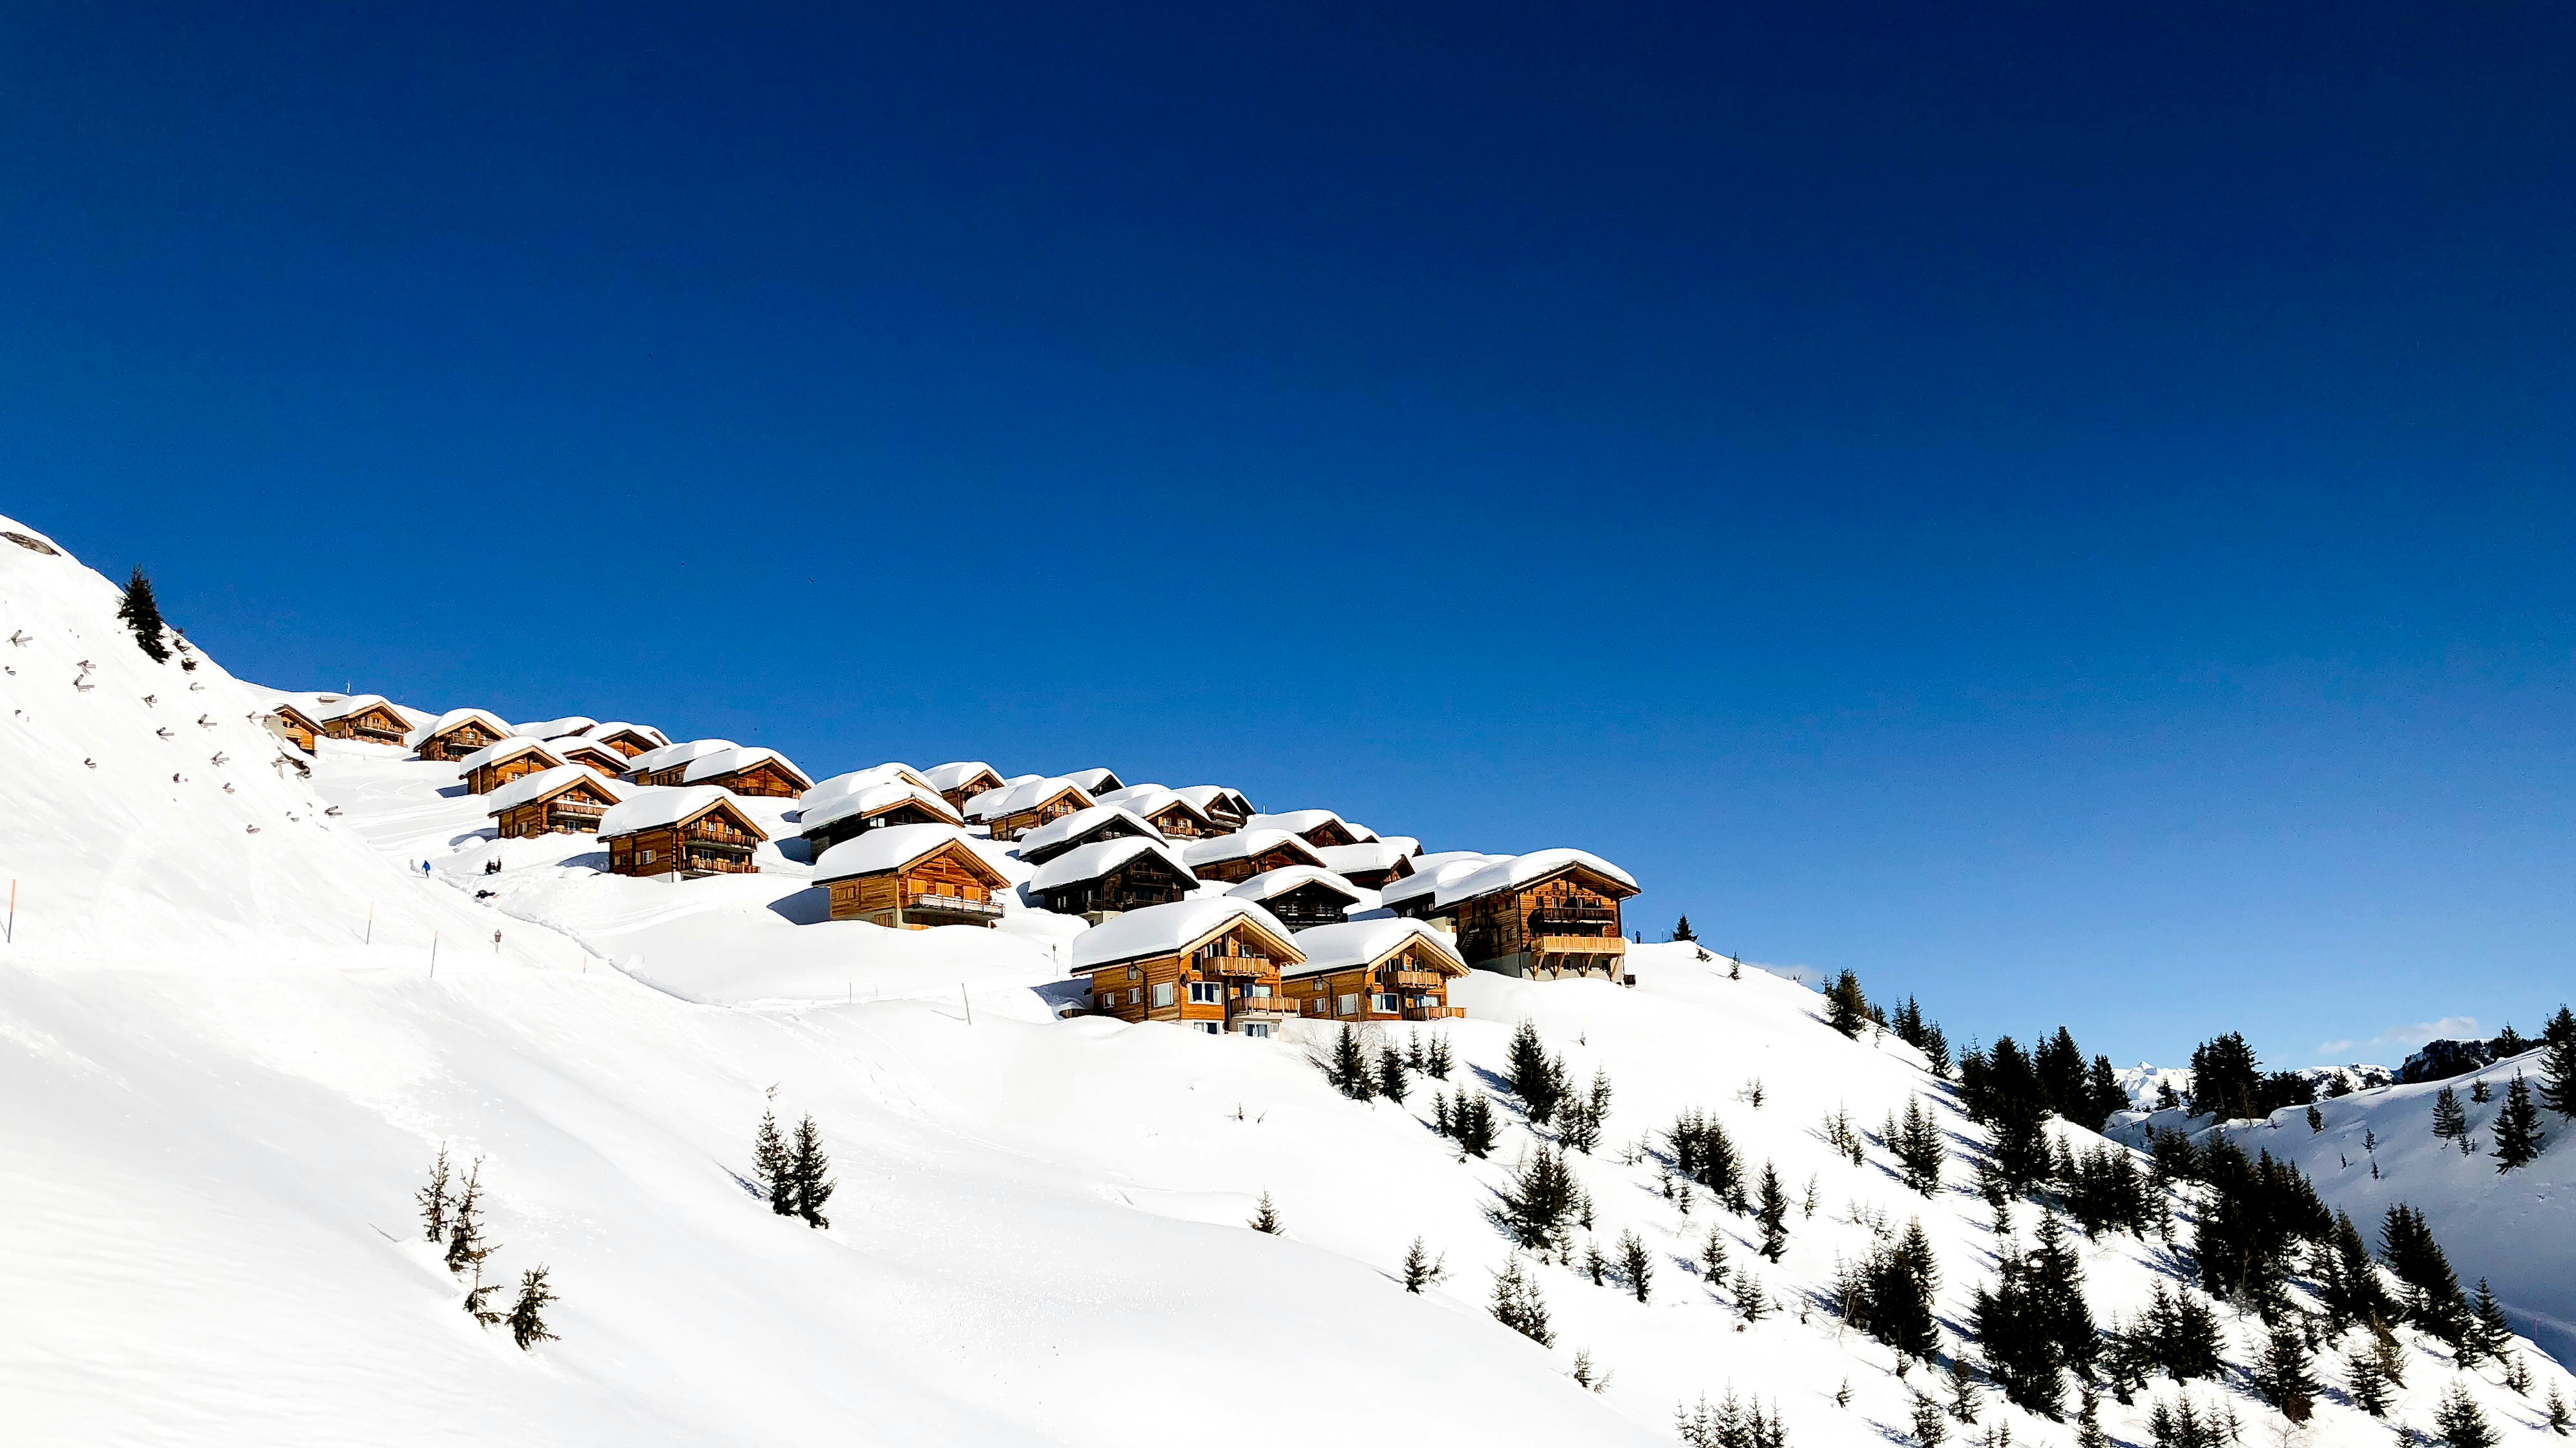 snow covered mountain with houses and trees during daytime